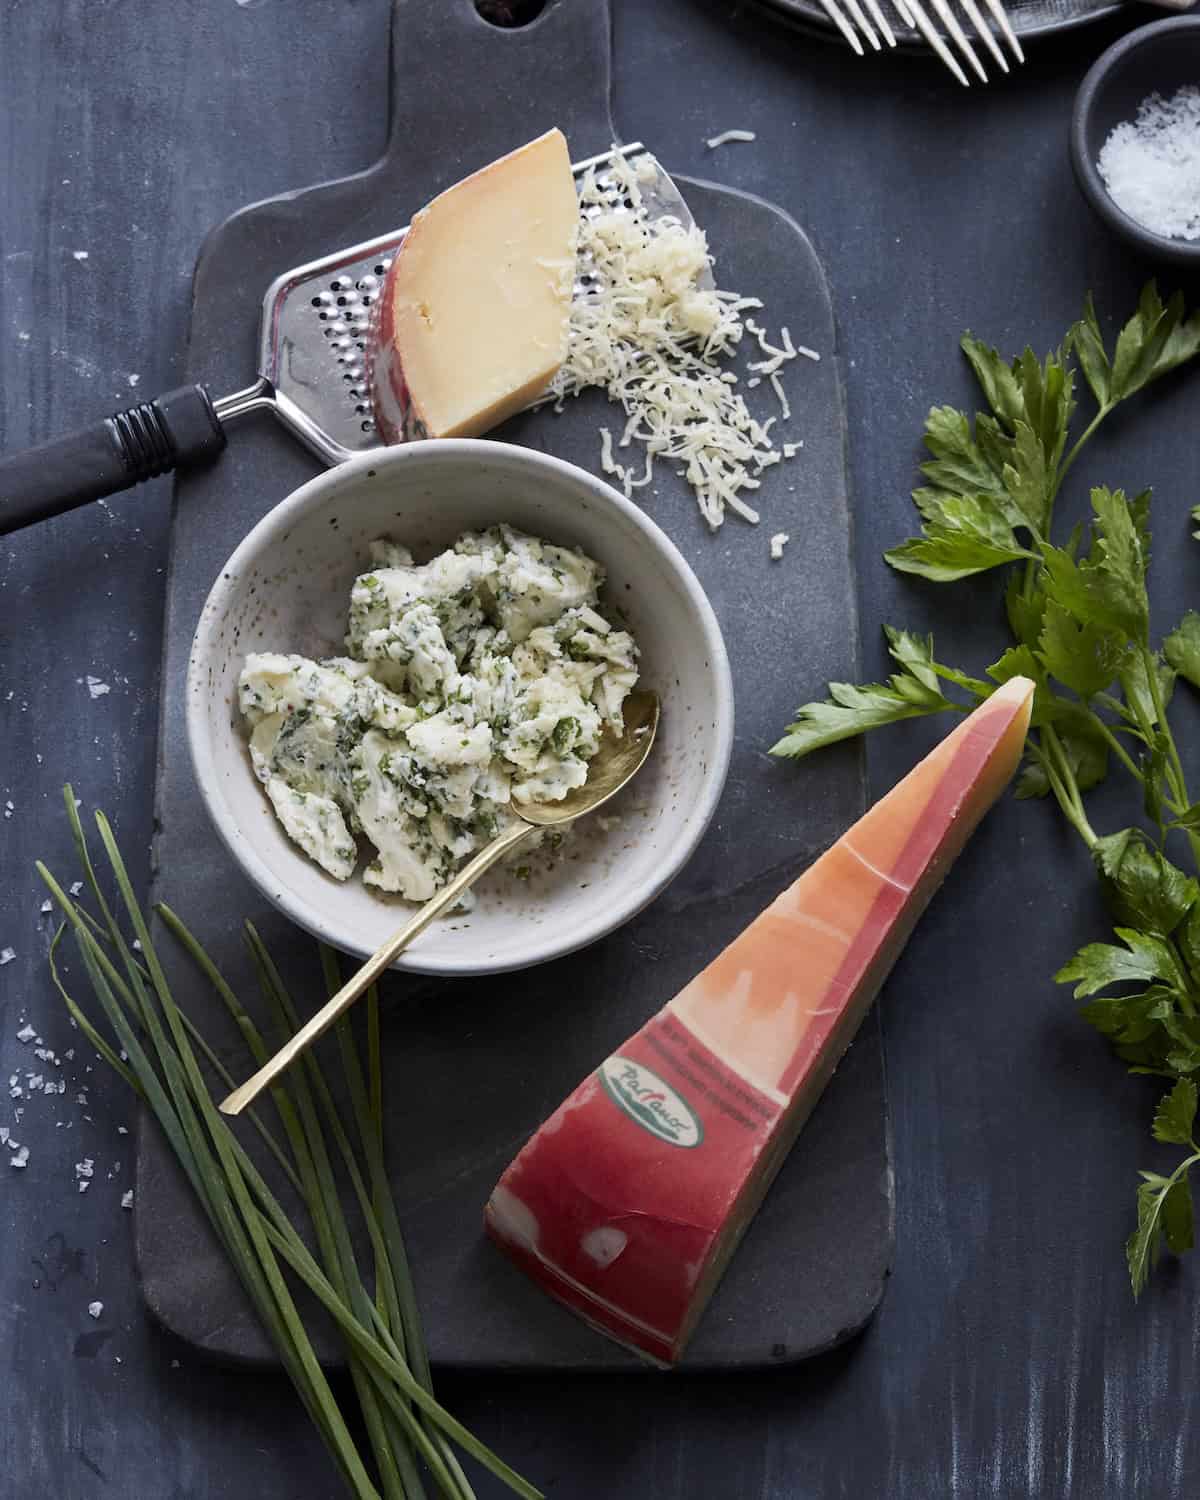 A cheese board with a bowl of compound butter, a grater with a block of cheese partially grated, another block of cheese, some parsley and chives, along with a little bowl of salt.